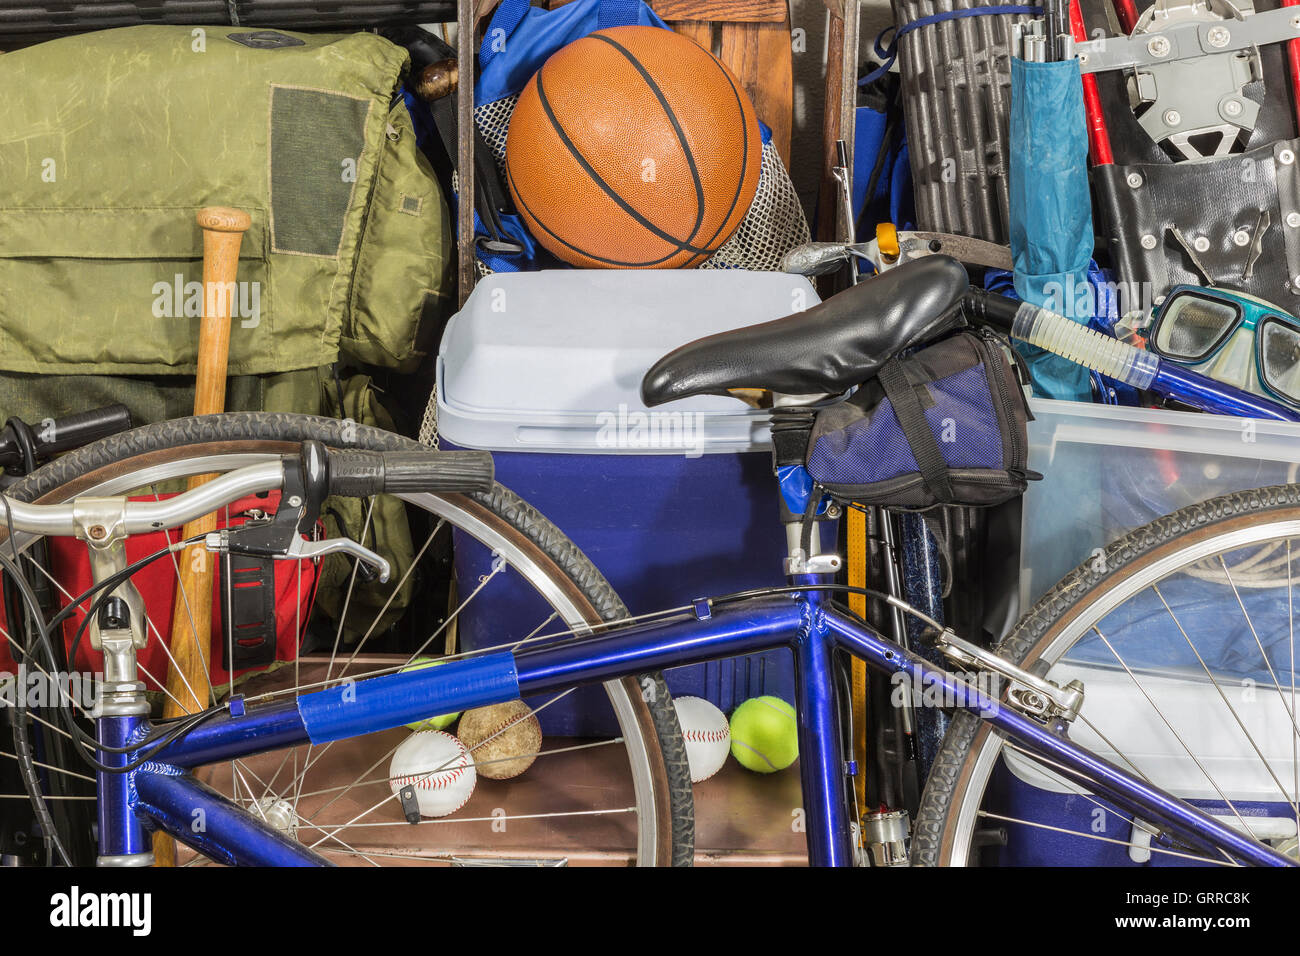 Vintage pile of worn sports and camping equipment.  Object names and logos were covered or removed. Stock Photo